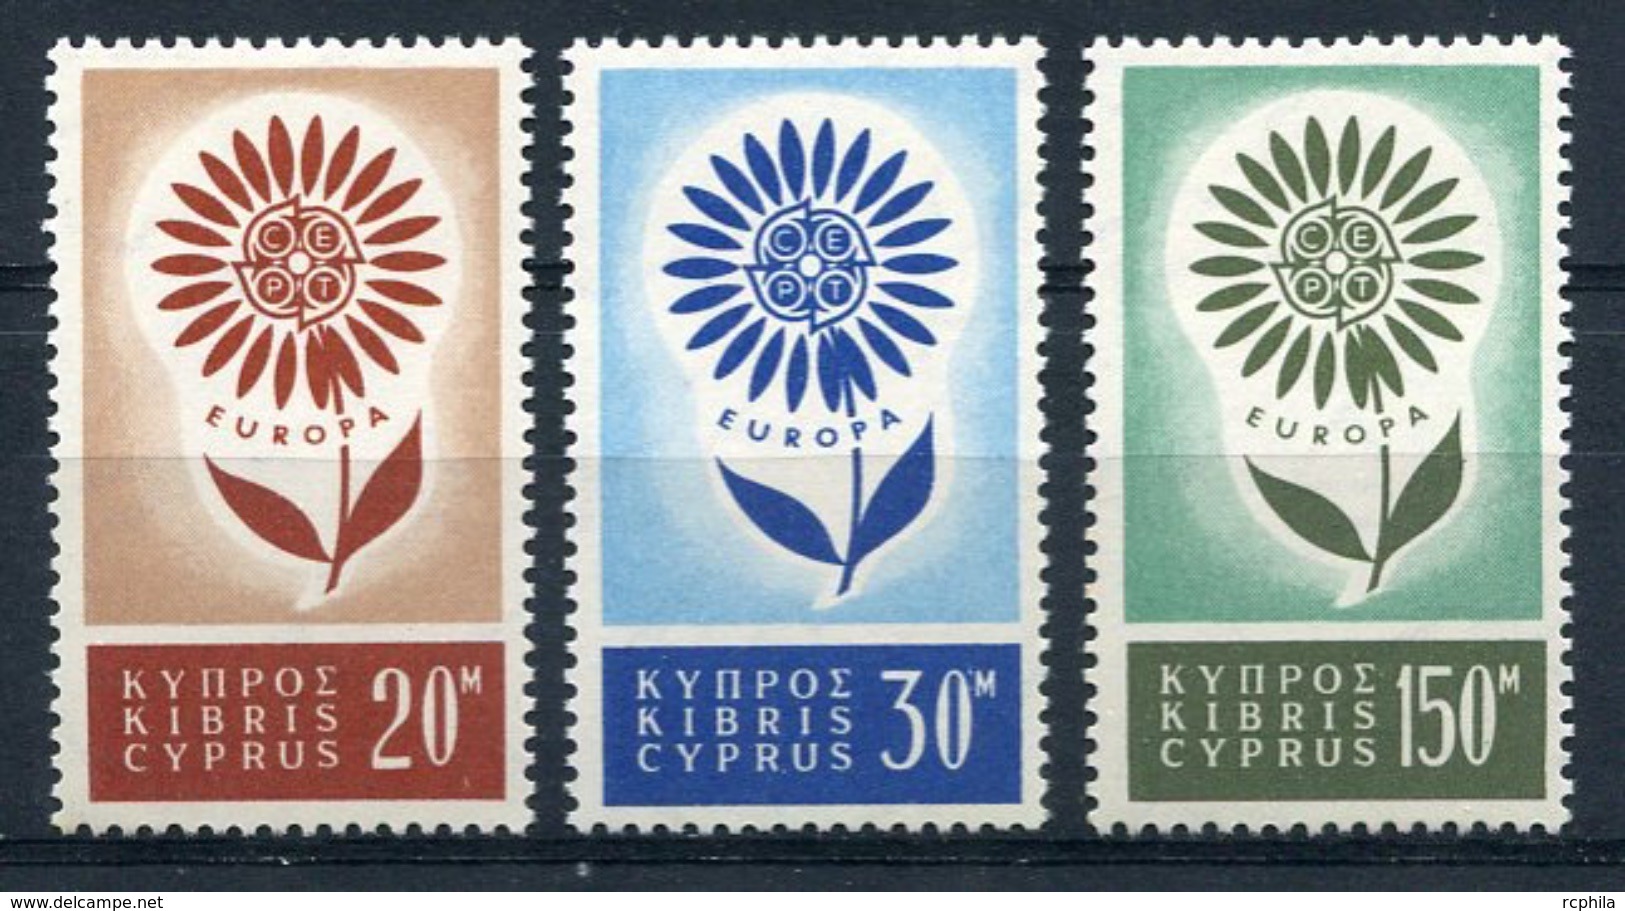 RC 8021 CHYPRE CYPRUS 232 / 234 - SERIE EUROPA 1964 COMPLÈTE COTE 60€ NEUF ** TB - Chipre (...-1960)